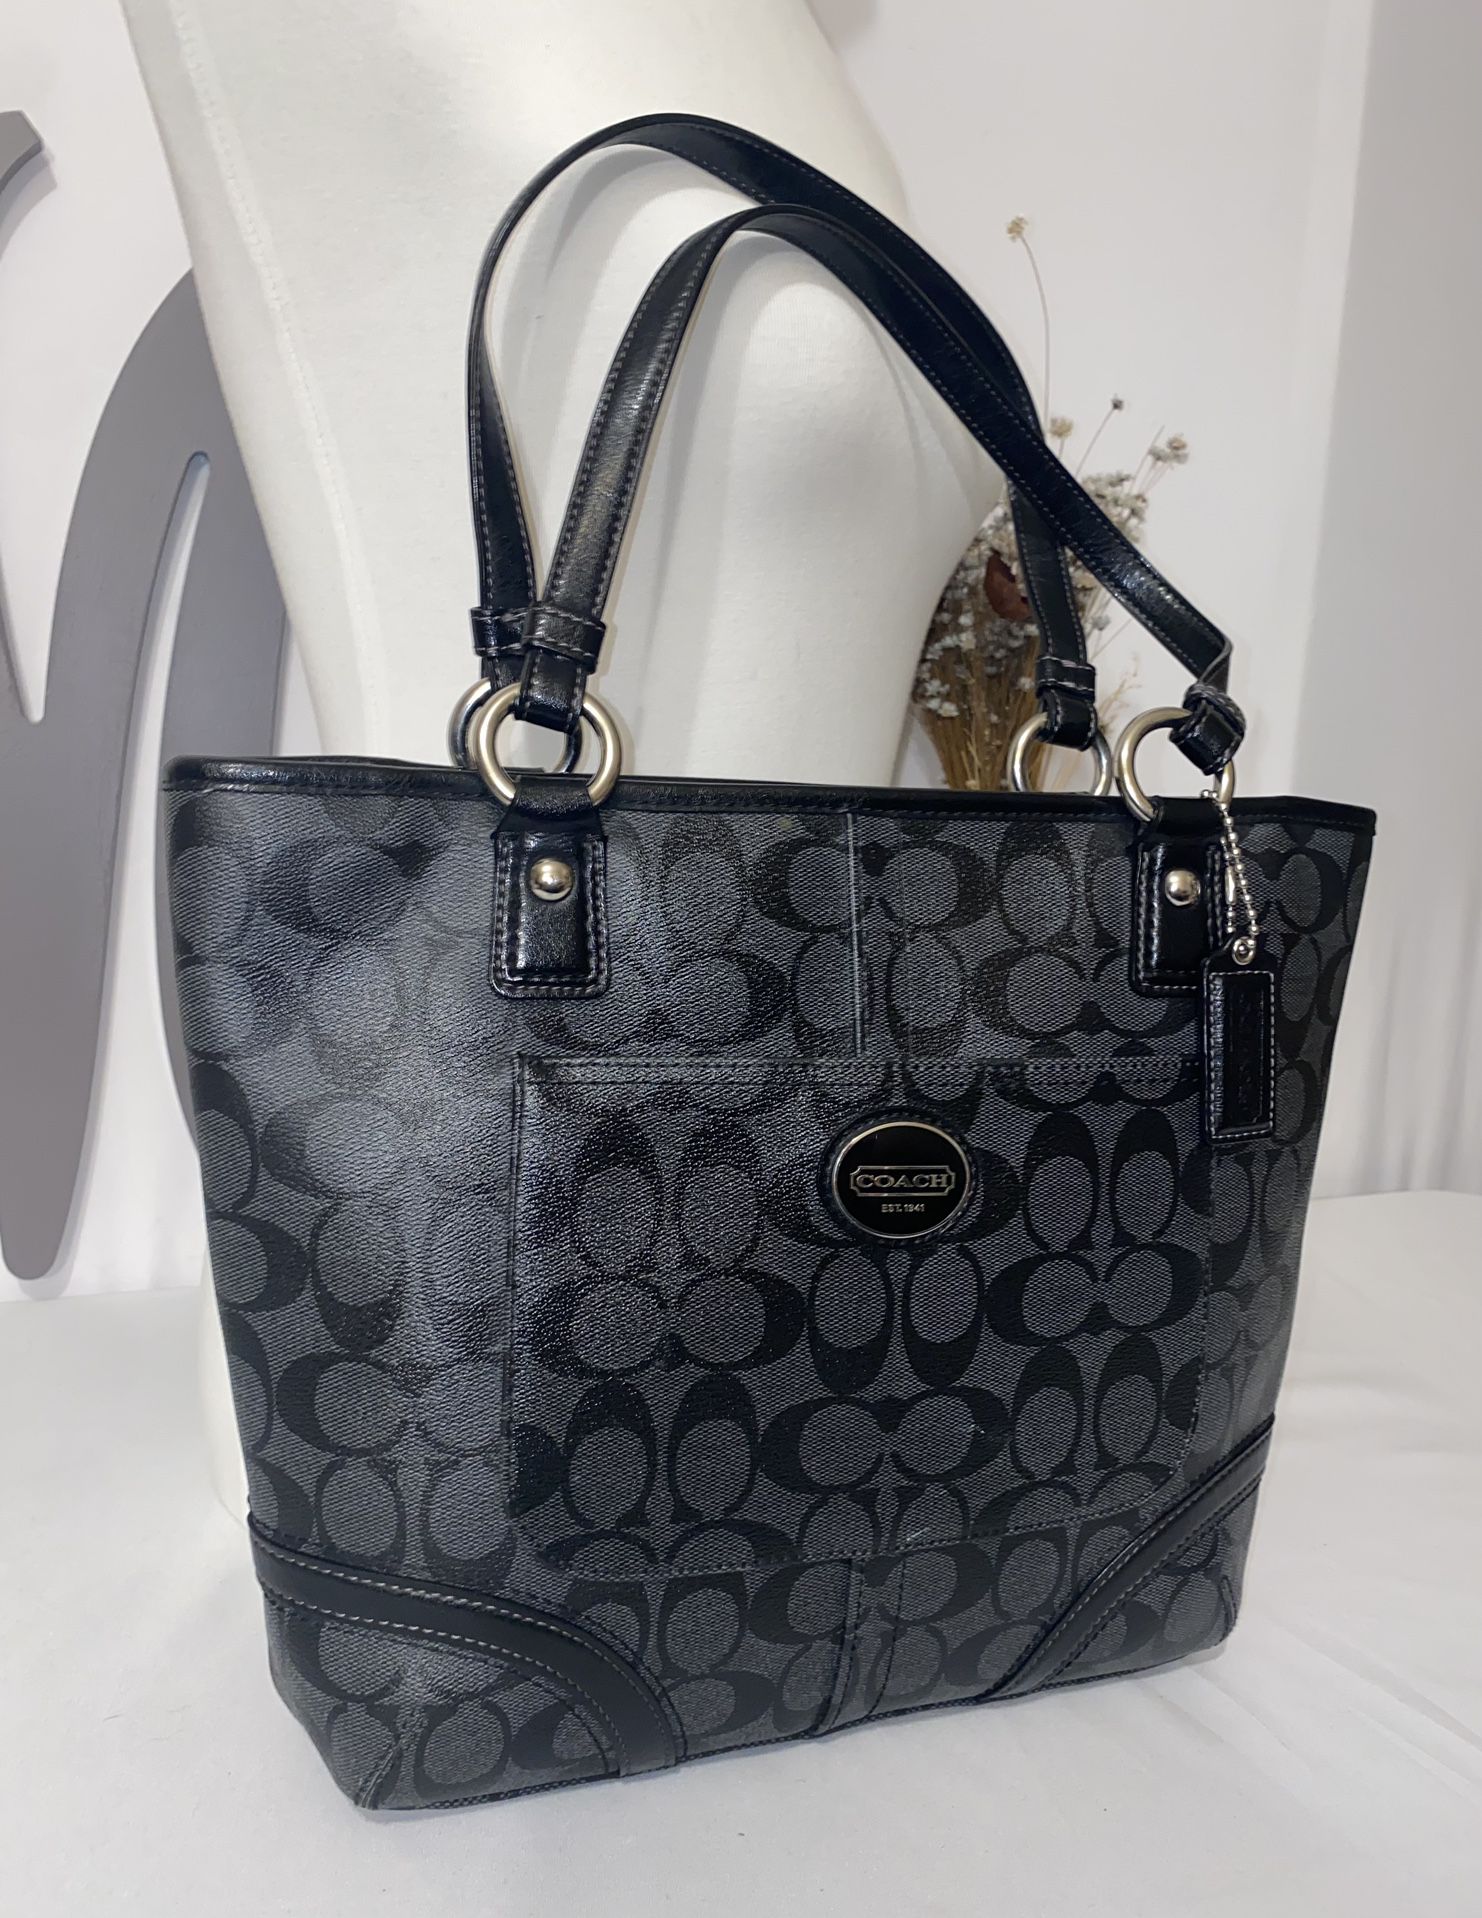 *COACH* Coach Peyton Black Leather Signature Tote Bag for Sale in Tucson,  AZ - OfferUp